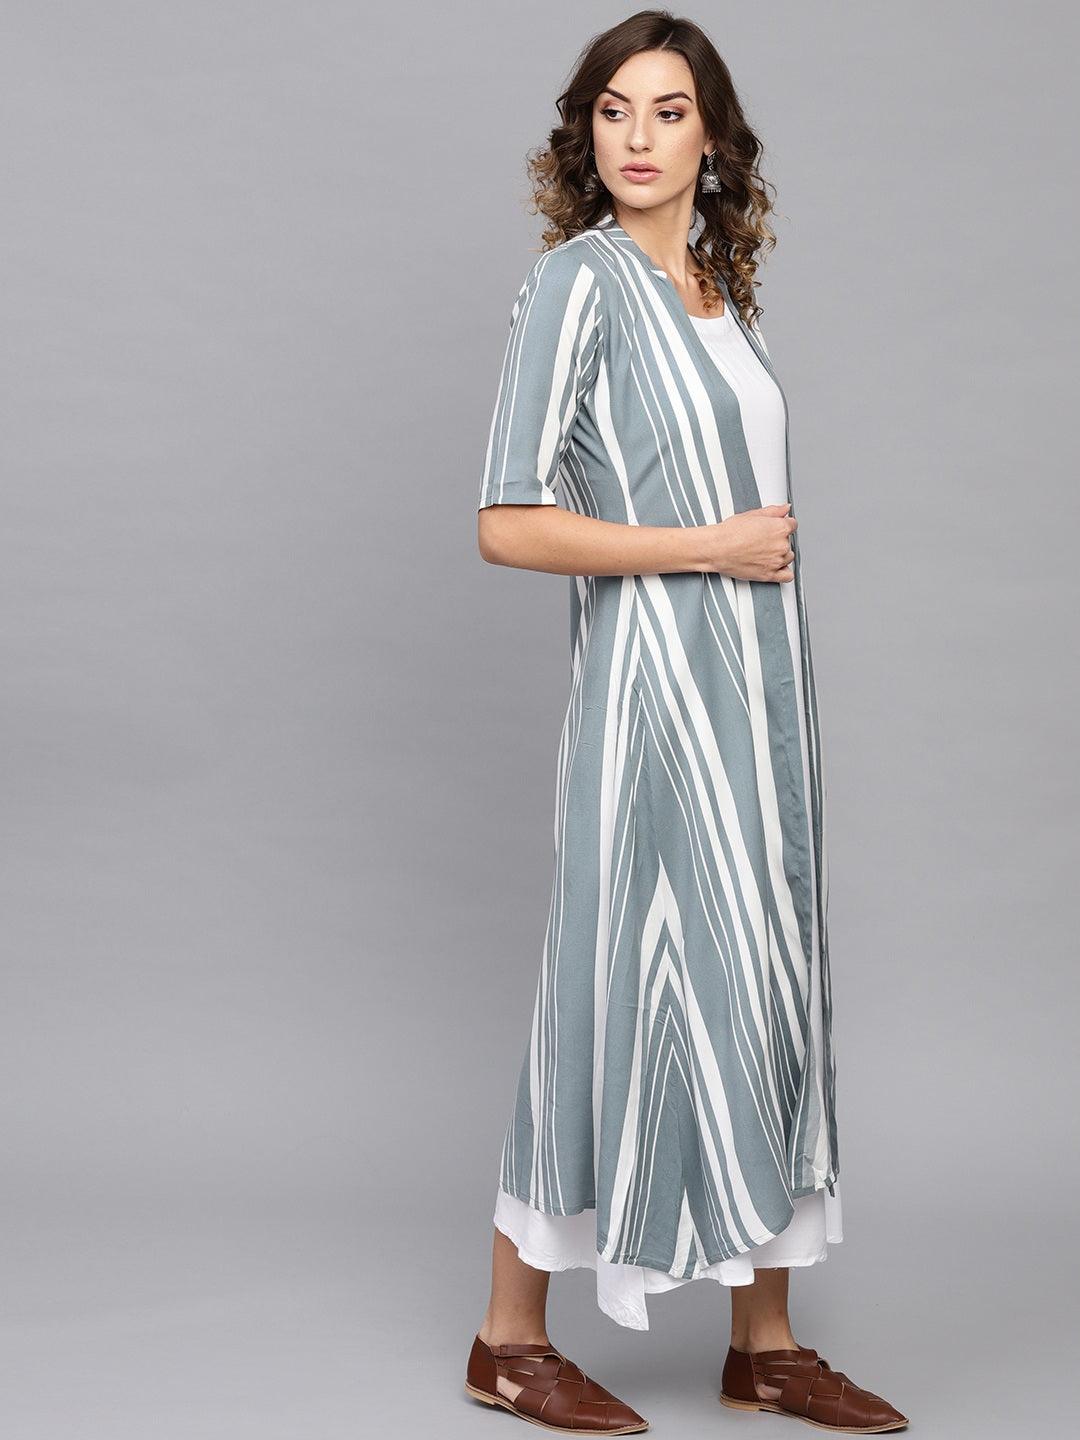 White Striped Rayon Dress With Jacket